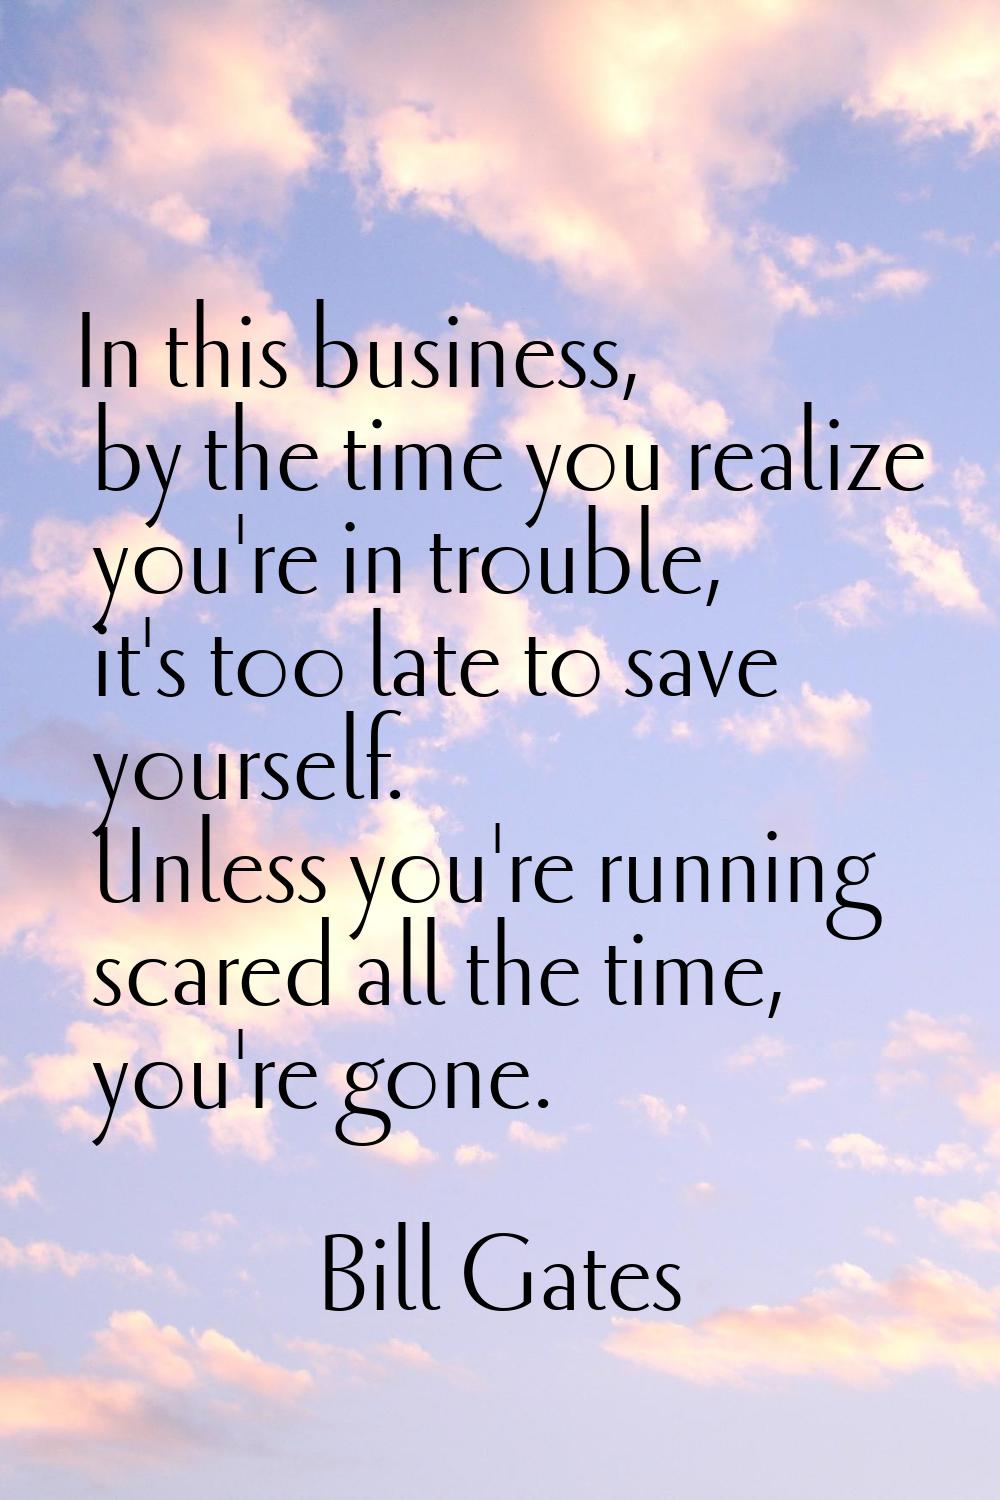 In this business, by the time you realize you're in trouble, it's too late to save yourself. Unless